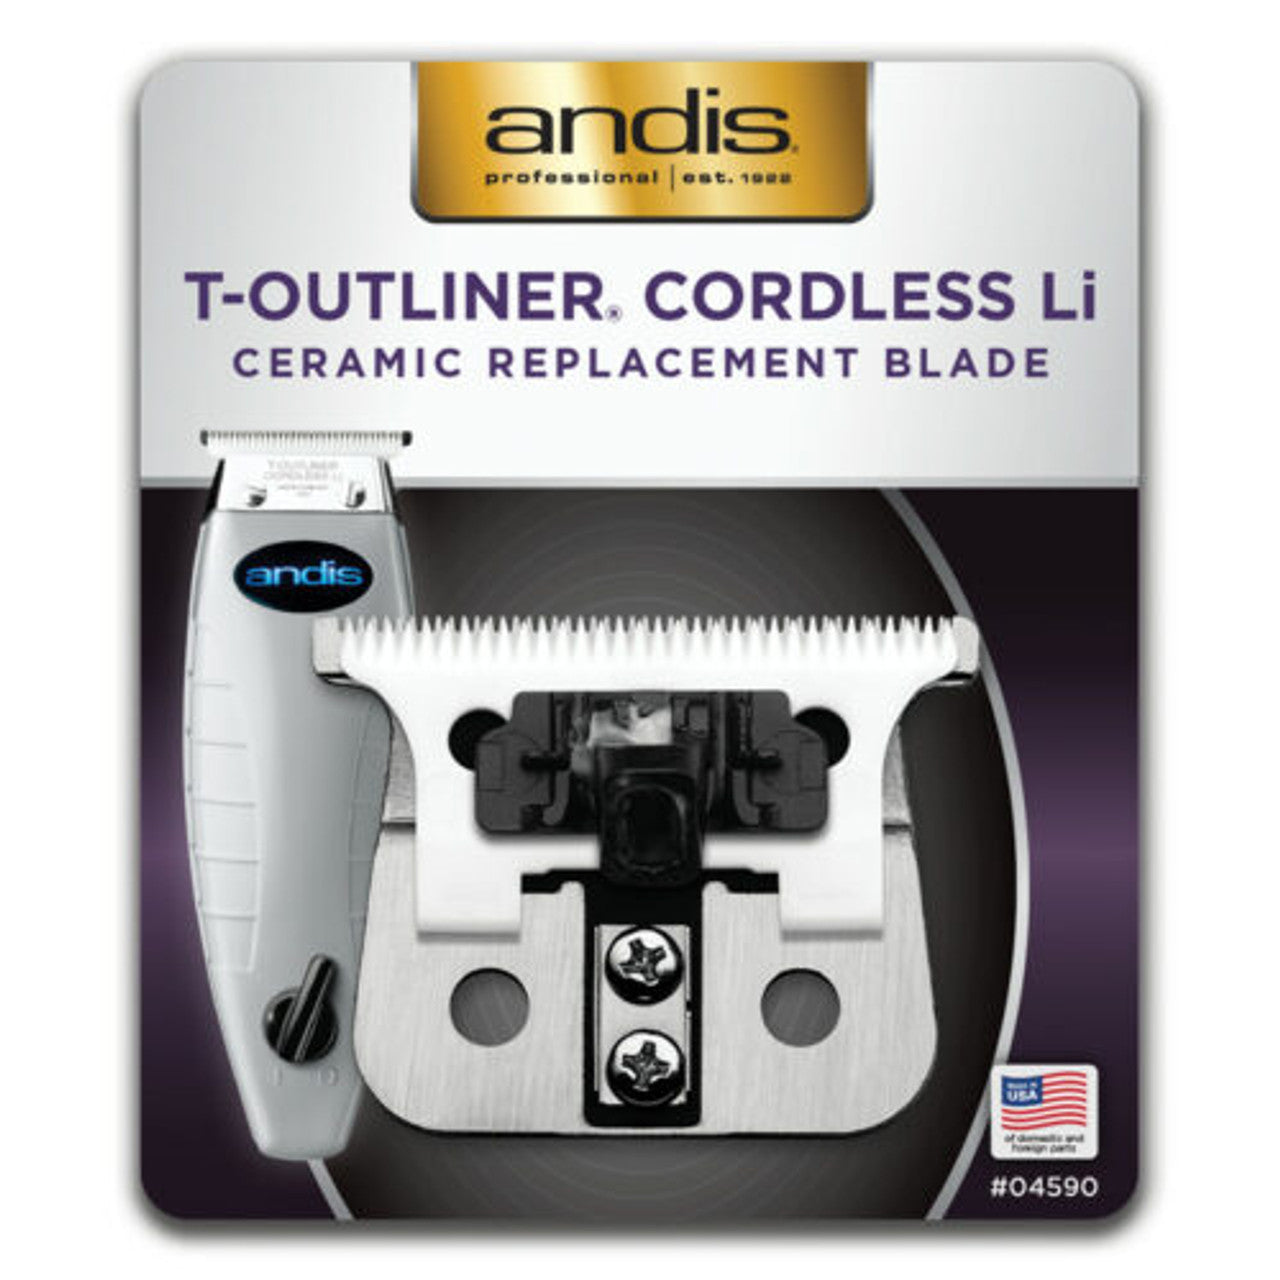 Andis T-Outliner Cordless Li Ceramic Replacement Blade 04590